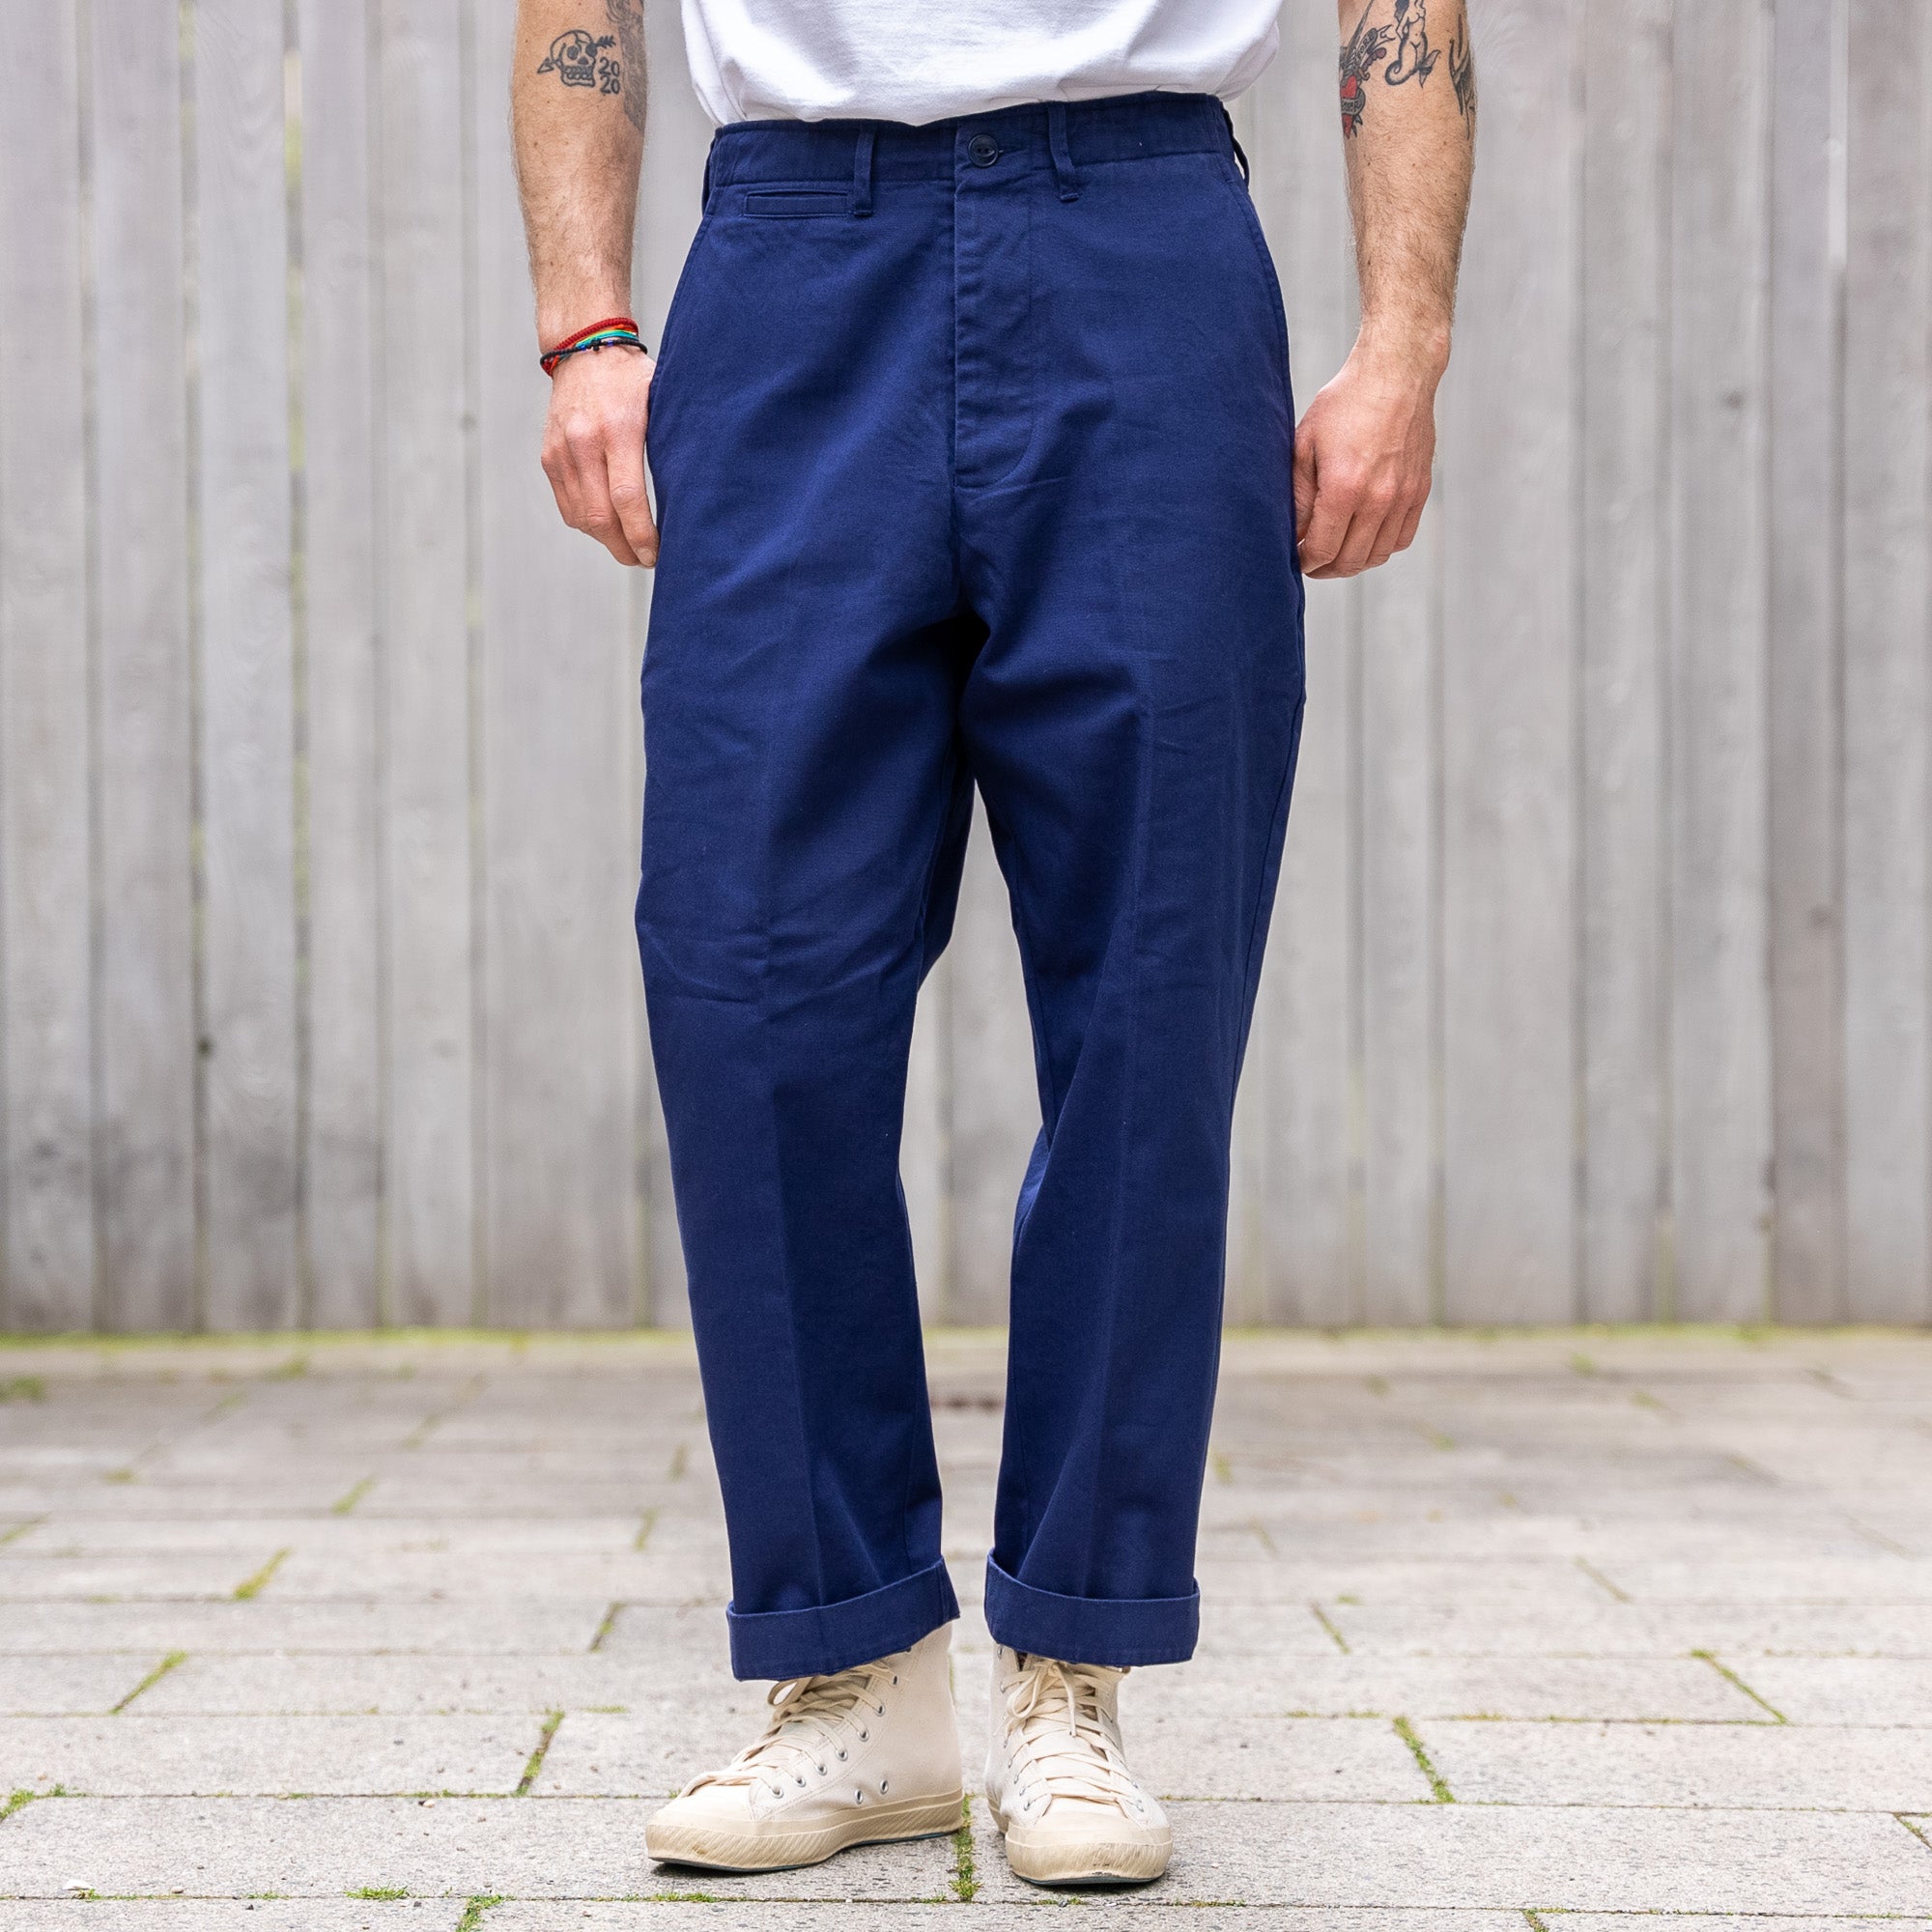 / Schwanen Chino Ink Tapered Merz Relaxed b Twill – Blue Pleat